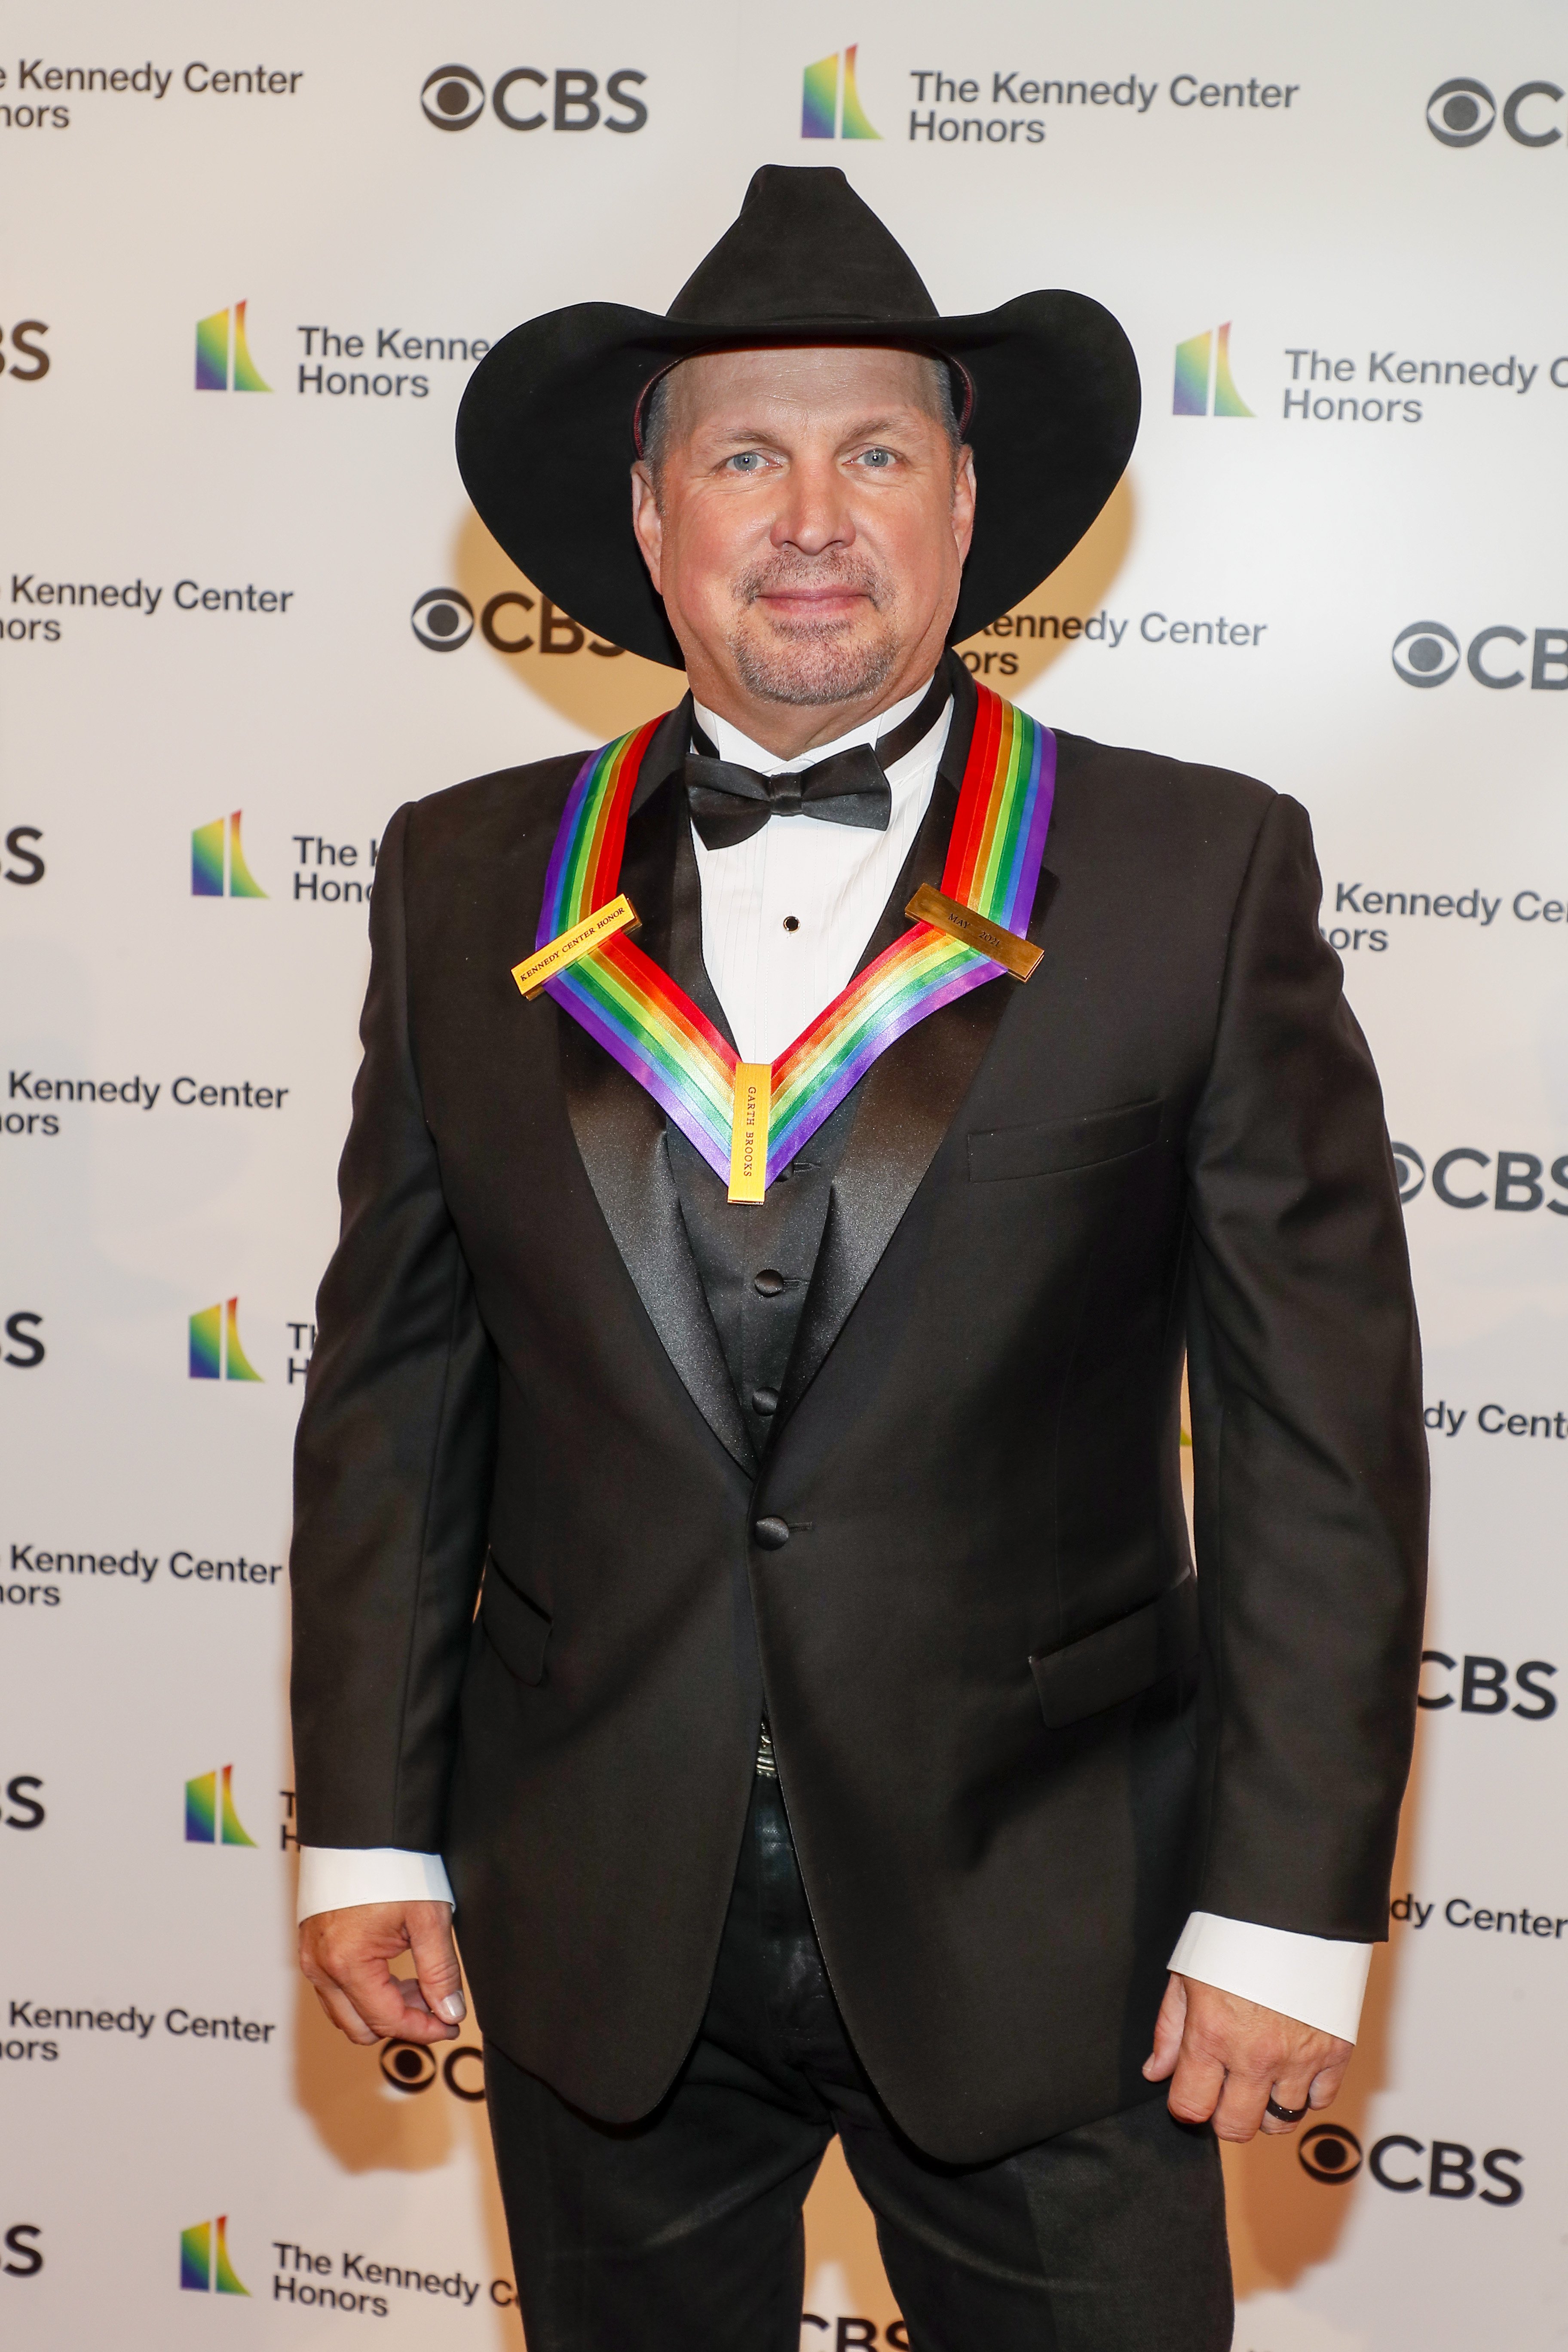 Garth Brooks attends the 43rd Annual Kennedy Center Honors at The Kennedy Center on May 21, 2021 in Washington, DC. | Source: Getty Images